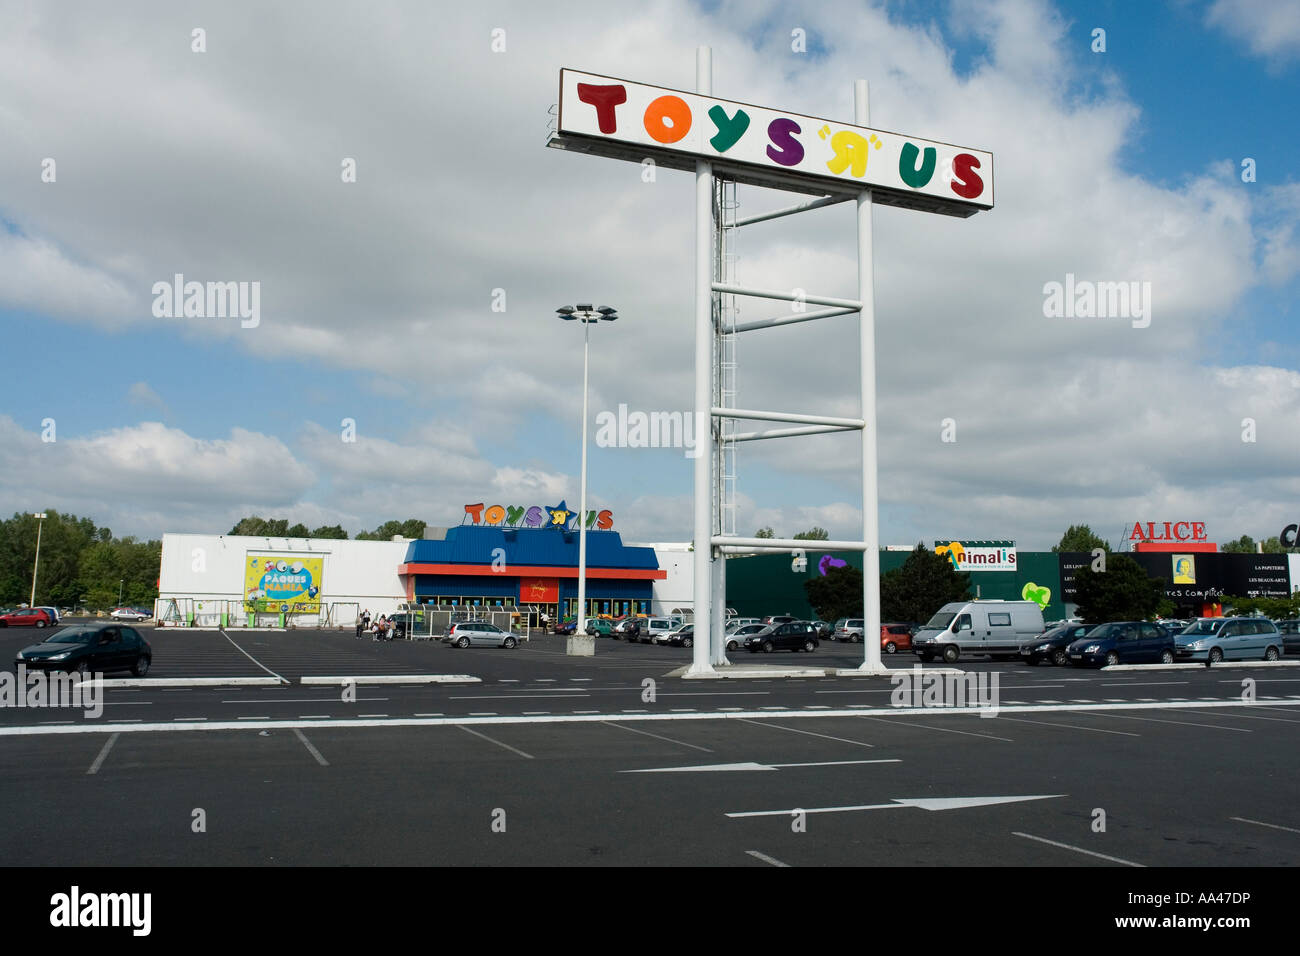 Toys r us toy store Le Lac Commercial Centre Bordeaux Gironde Aquitaine  France Europe Stock Photo - Alamy